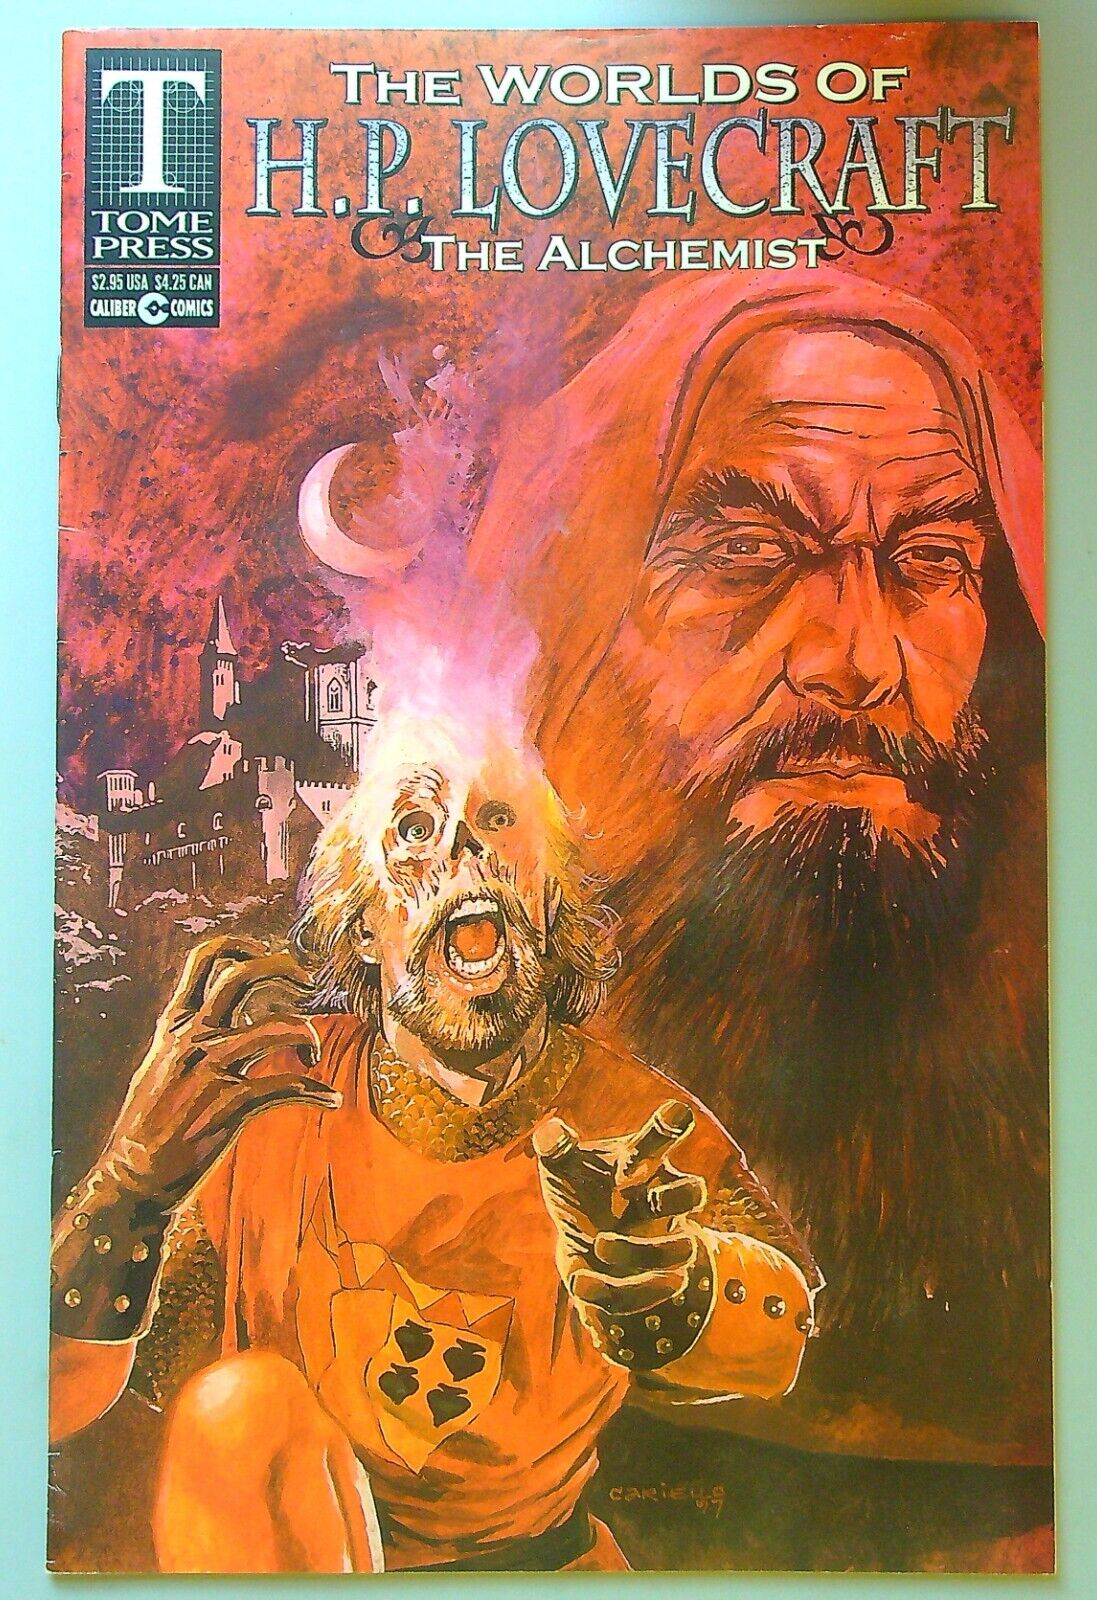 The Worlds of H.P. Lovecraft: The Alchemist ~ TOME PRESS 1997 FN/VF